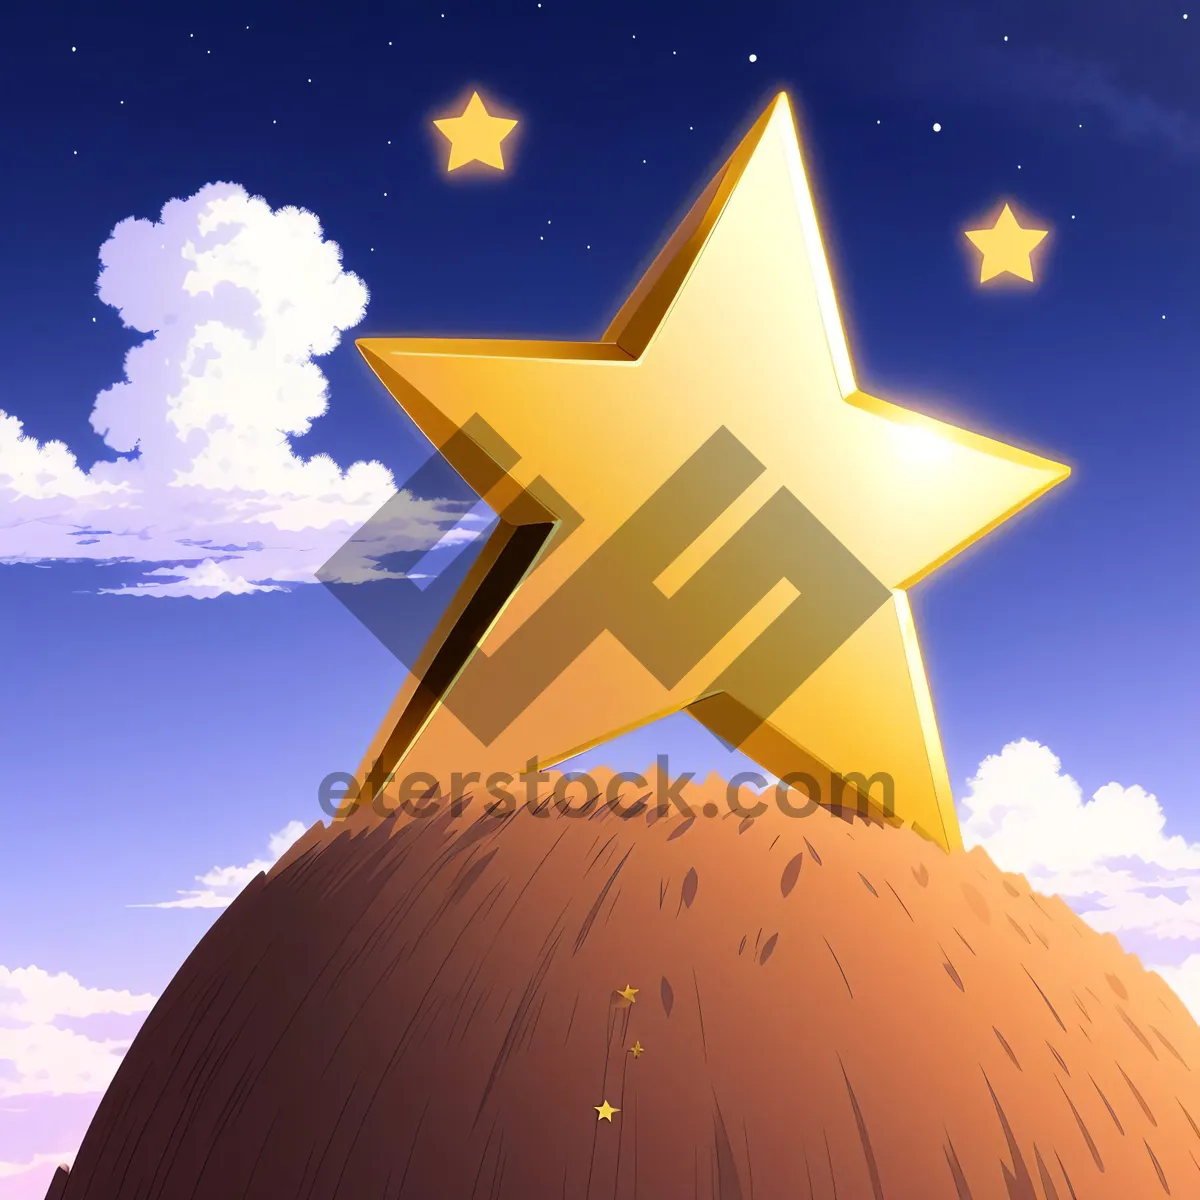 Picture of Mystical Night: Moonlit Starry Sky Over Pyramid and Dome Design